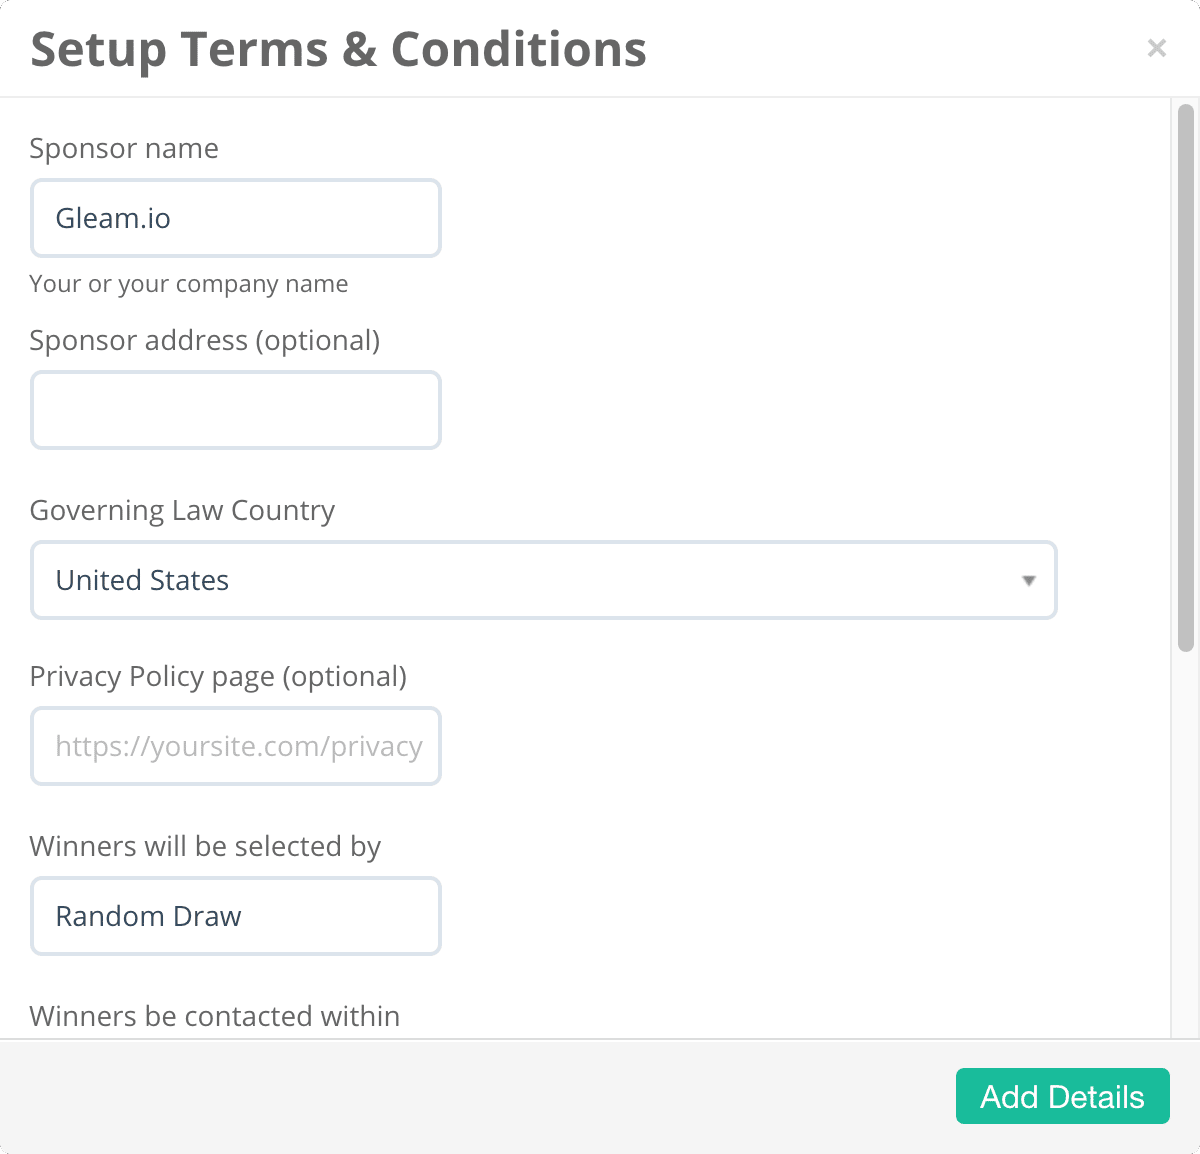 Optional fields to enhance your automatically generated terms & conditions on Gleam campaigns